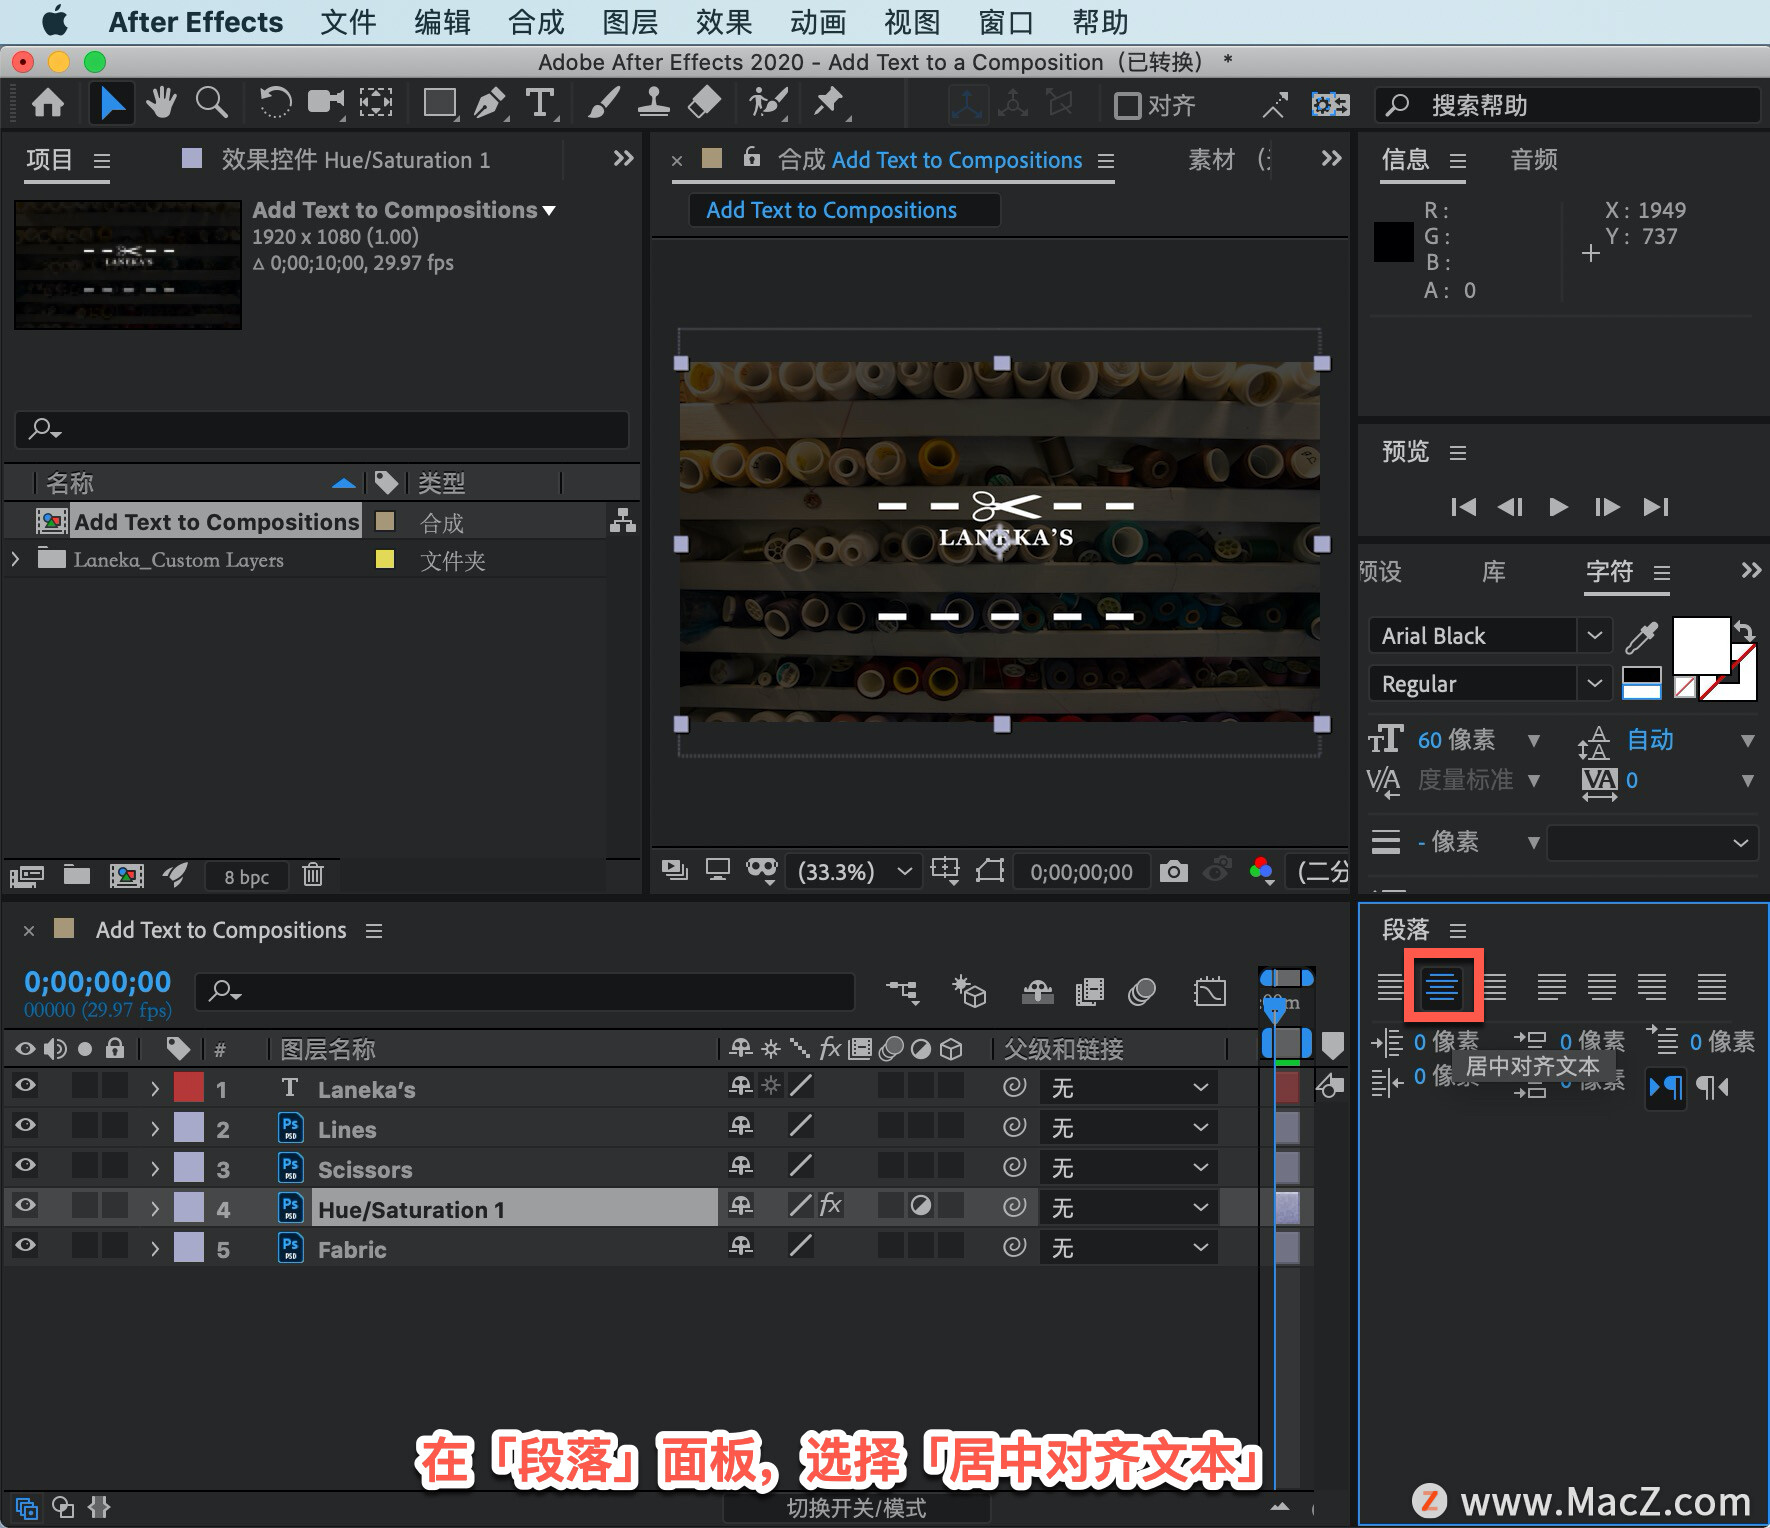 After Effects 教程「13」，如何在 After Effects 中将文本图层添加到合成？